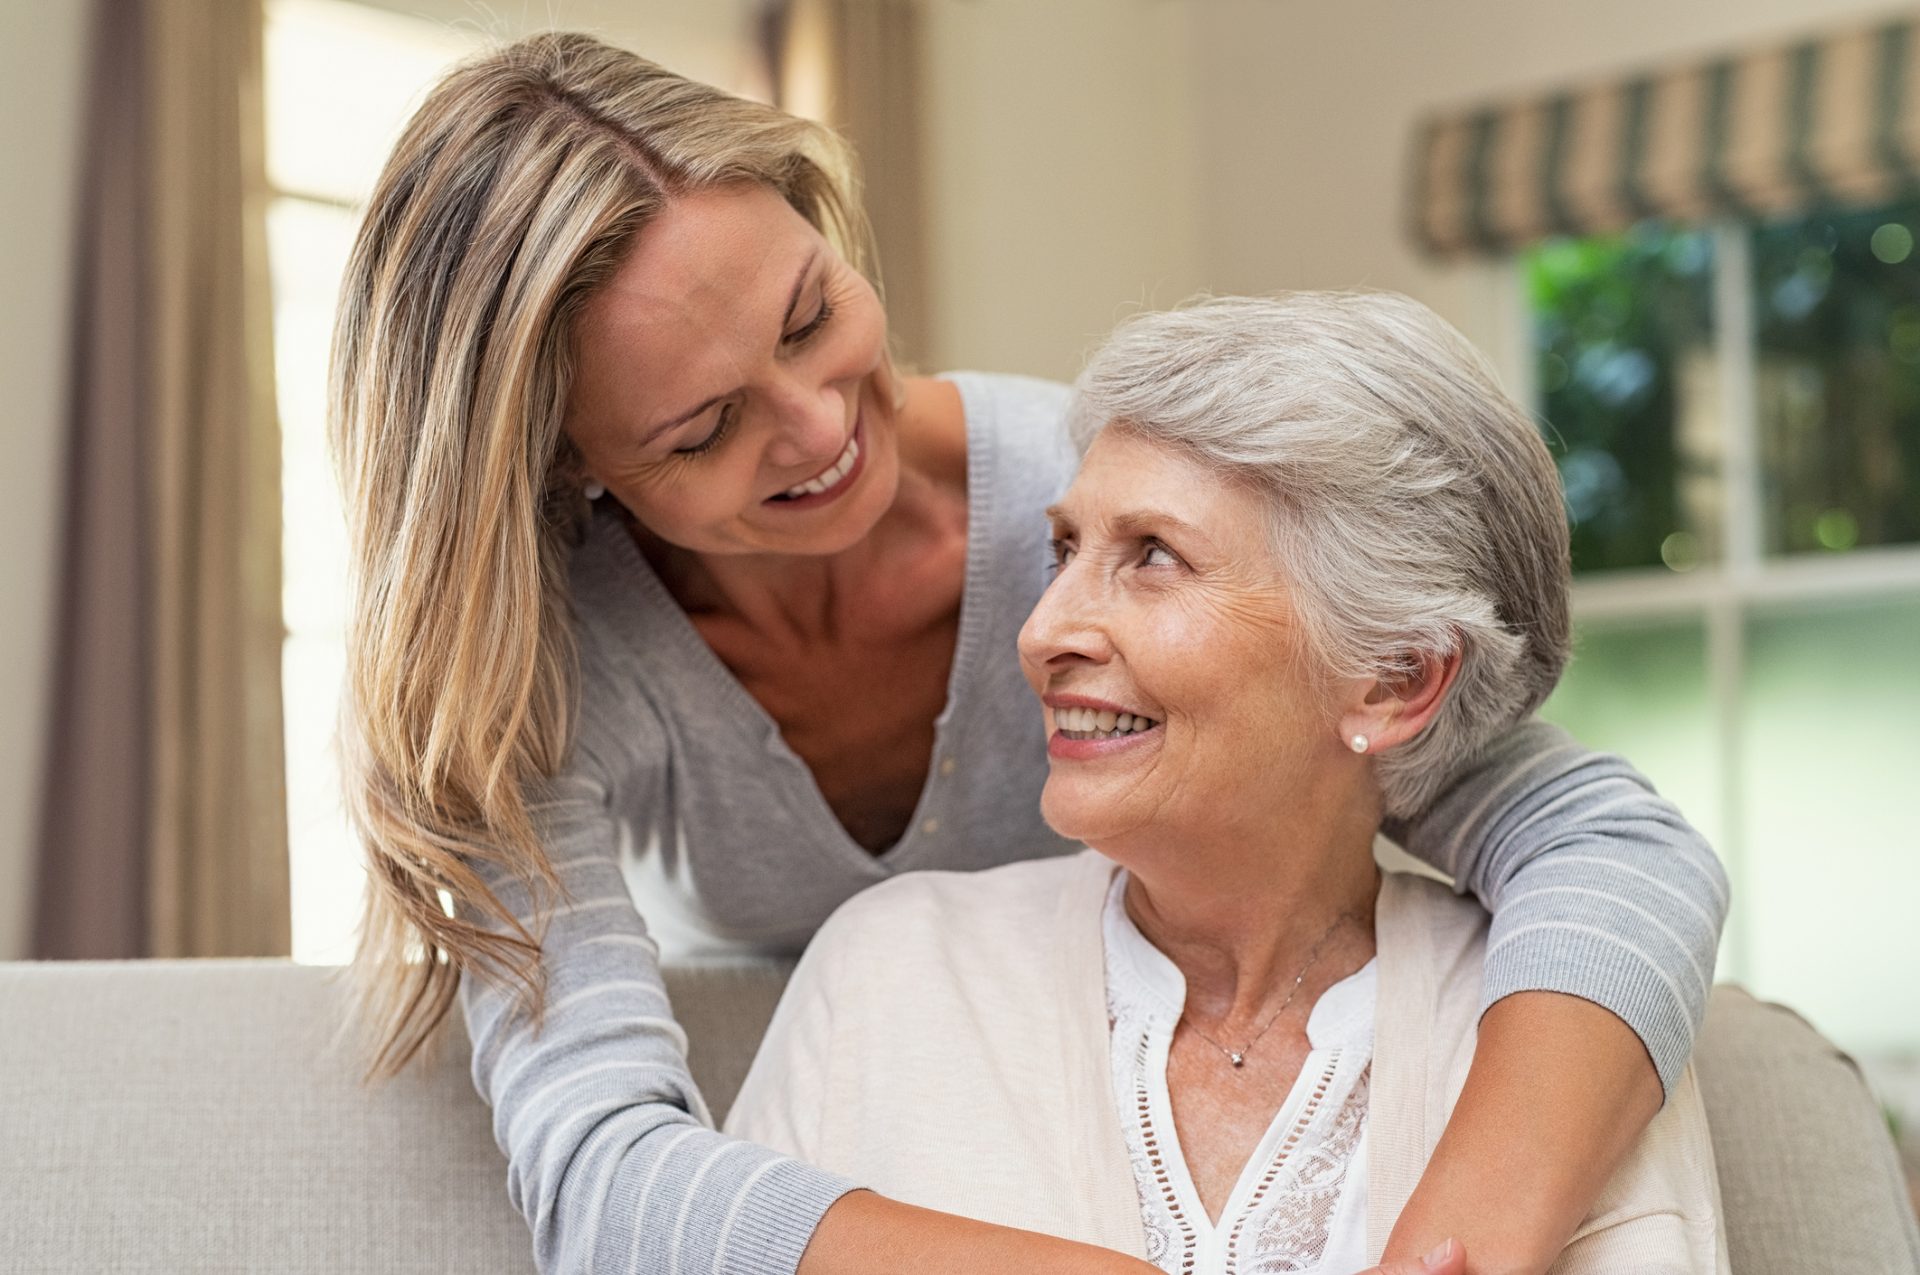 Younger woman embracing an older woman, both smiling, inside a living space.